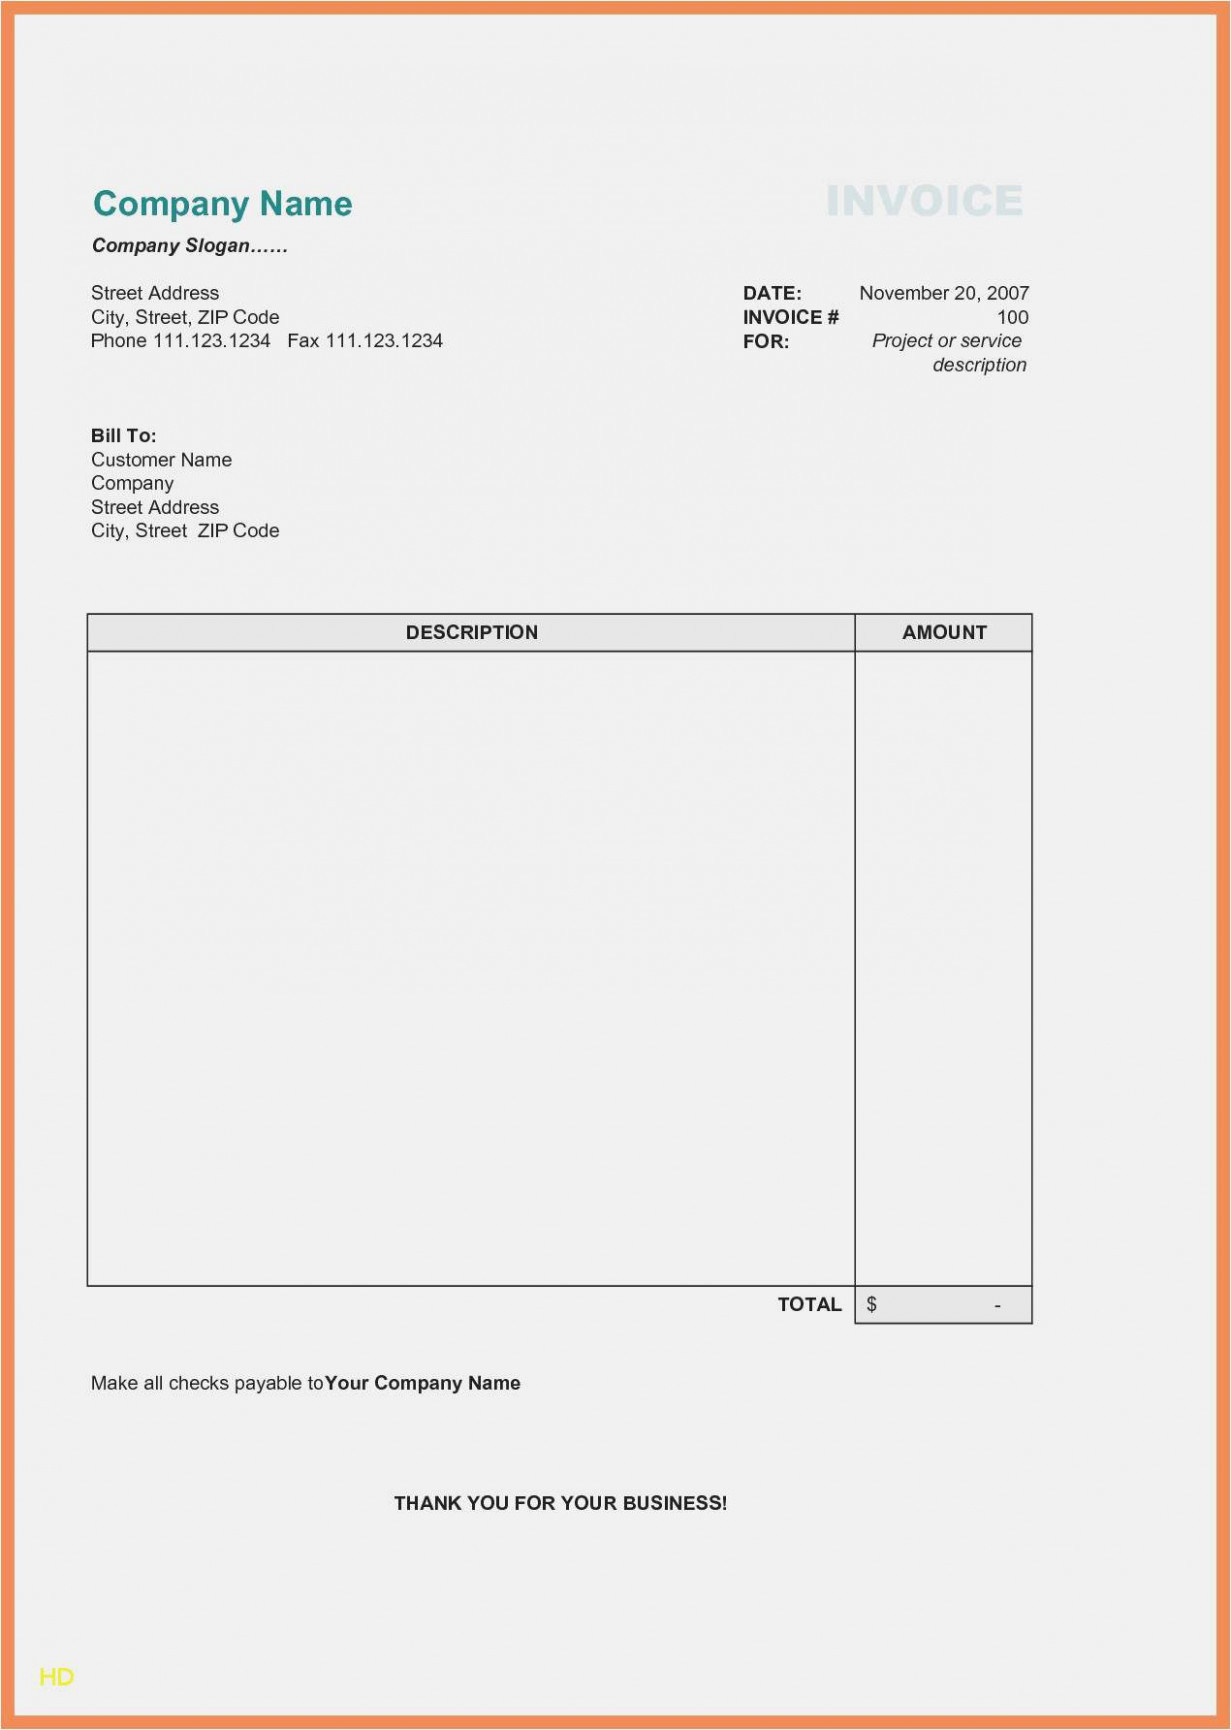 Invoice Template Fillable Pdf Awesome 14 Questions to ask at